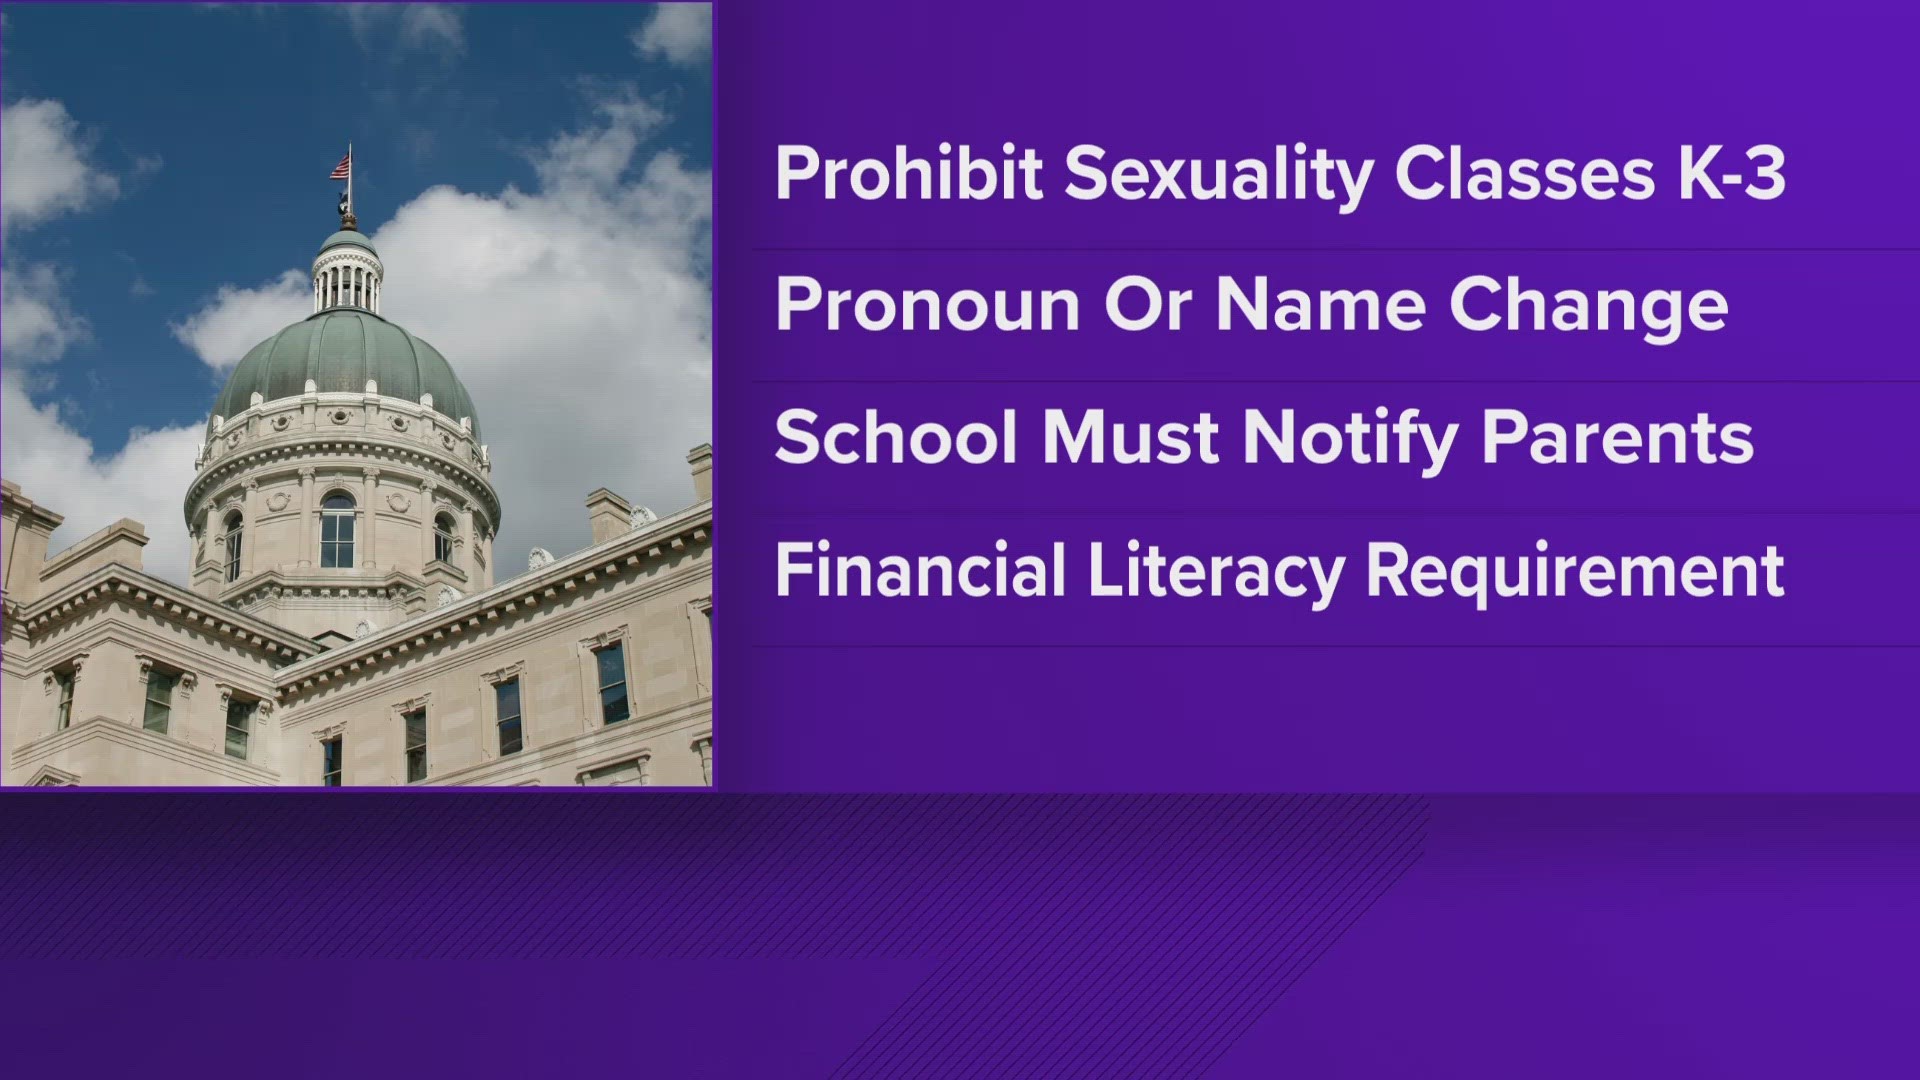 They include House Bill 1608. It prohibits teachers from instructing K-3 on Human sexuality.